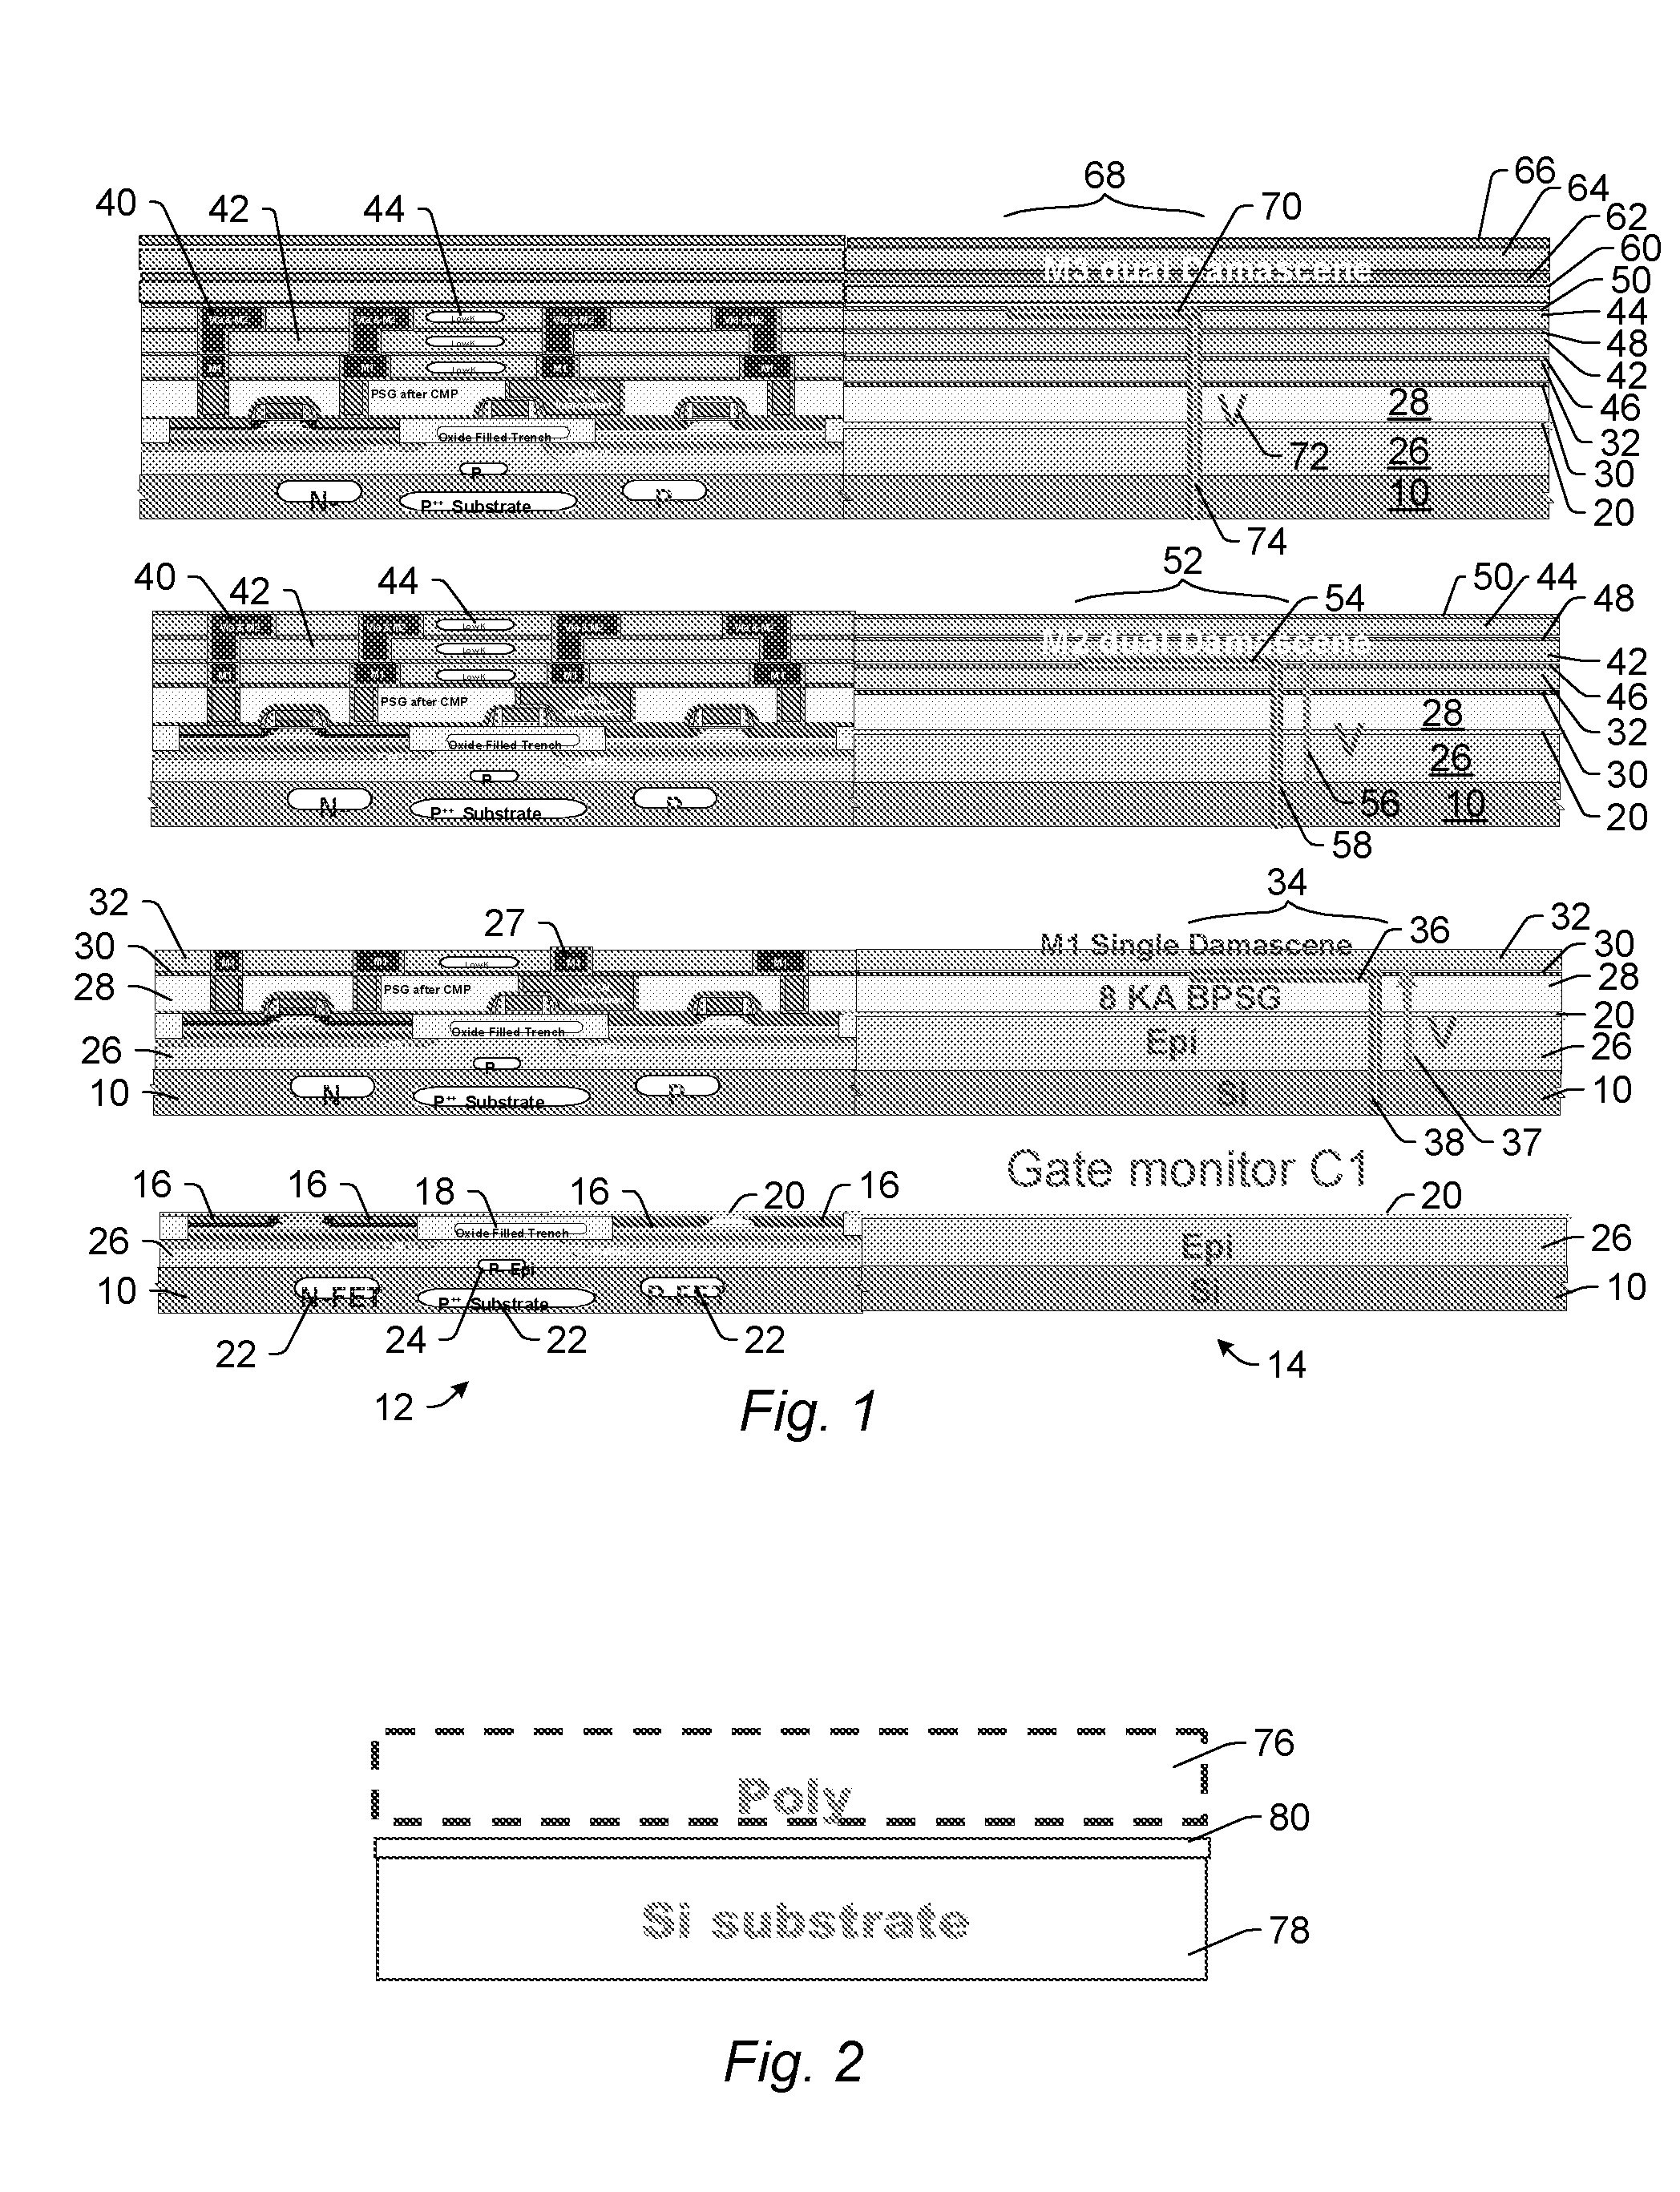 Test Pads, Methods and Systems for Measuring Properties of a Wafer